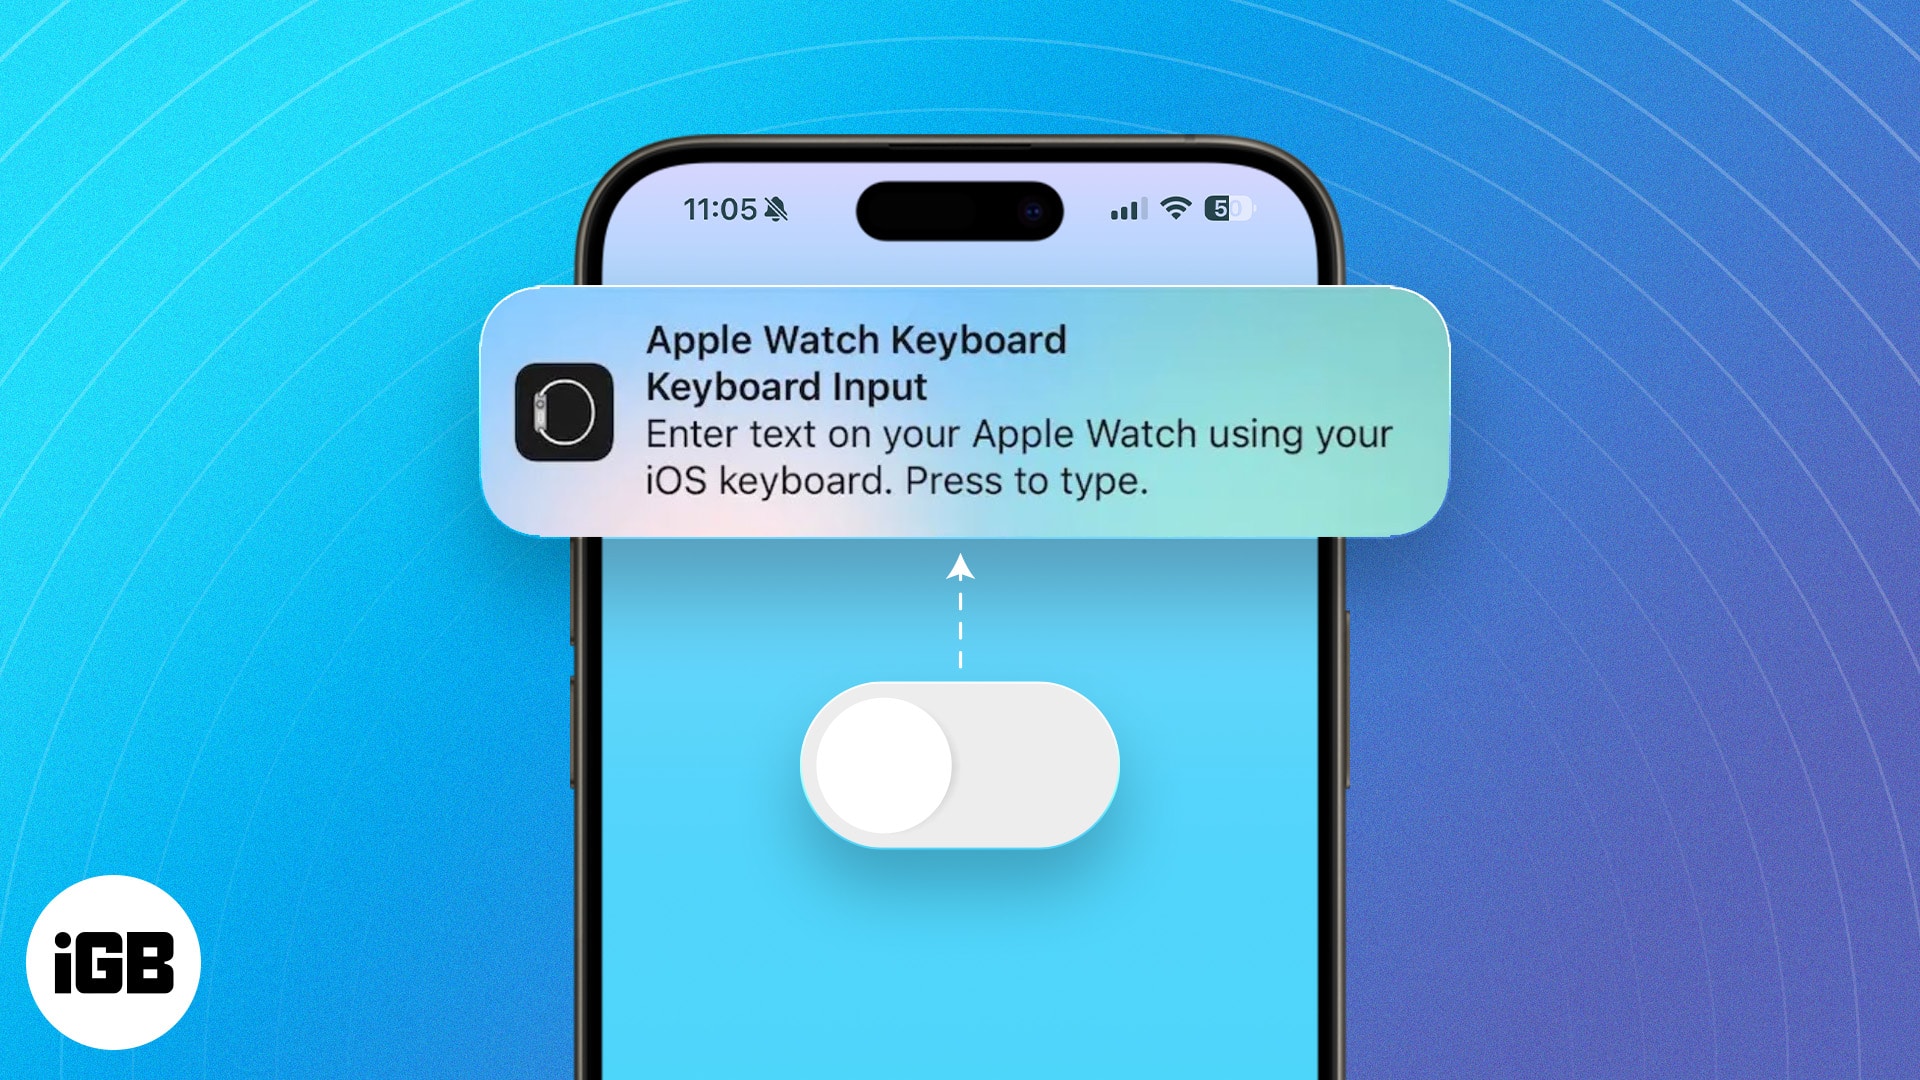 How to turn off Apple Watch Keyboard Notification on iPhone